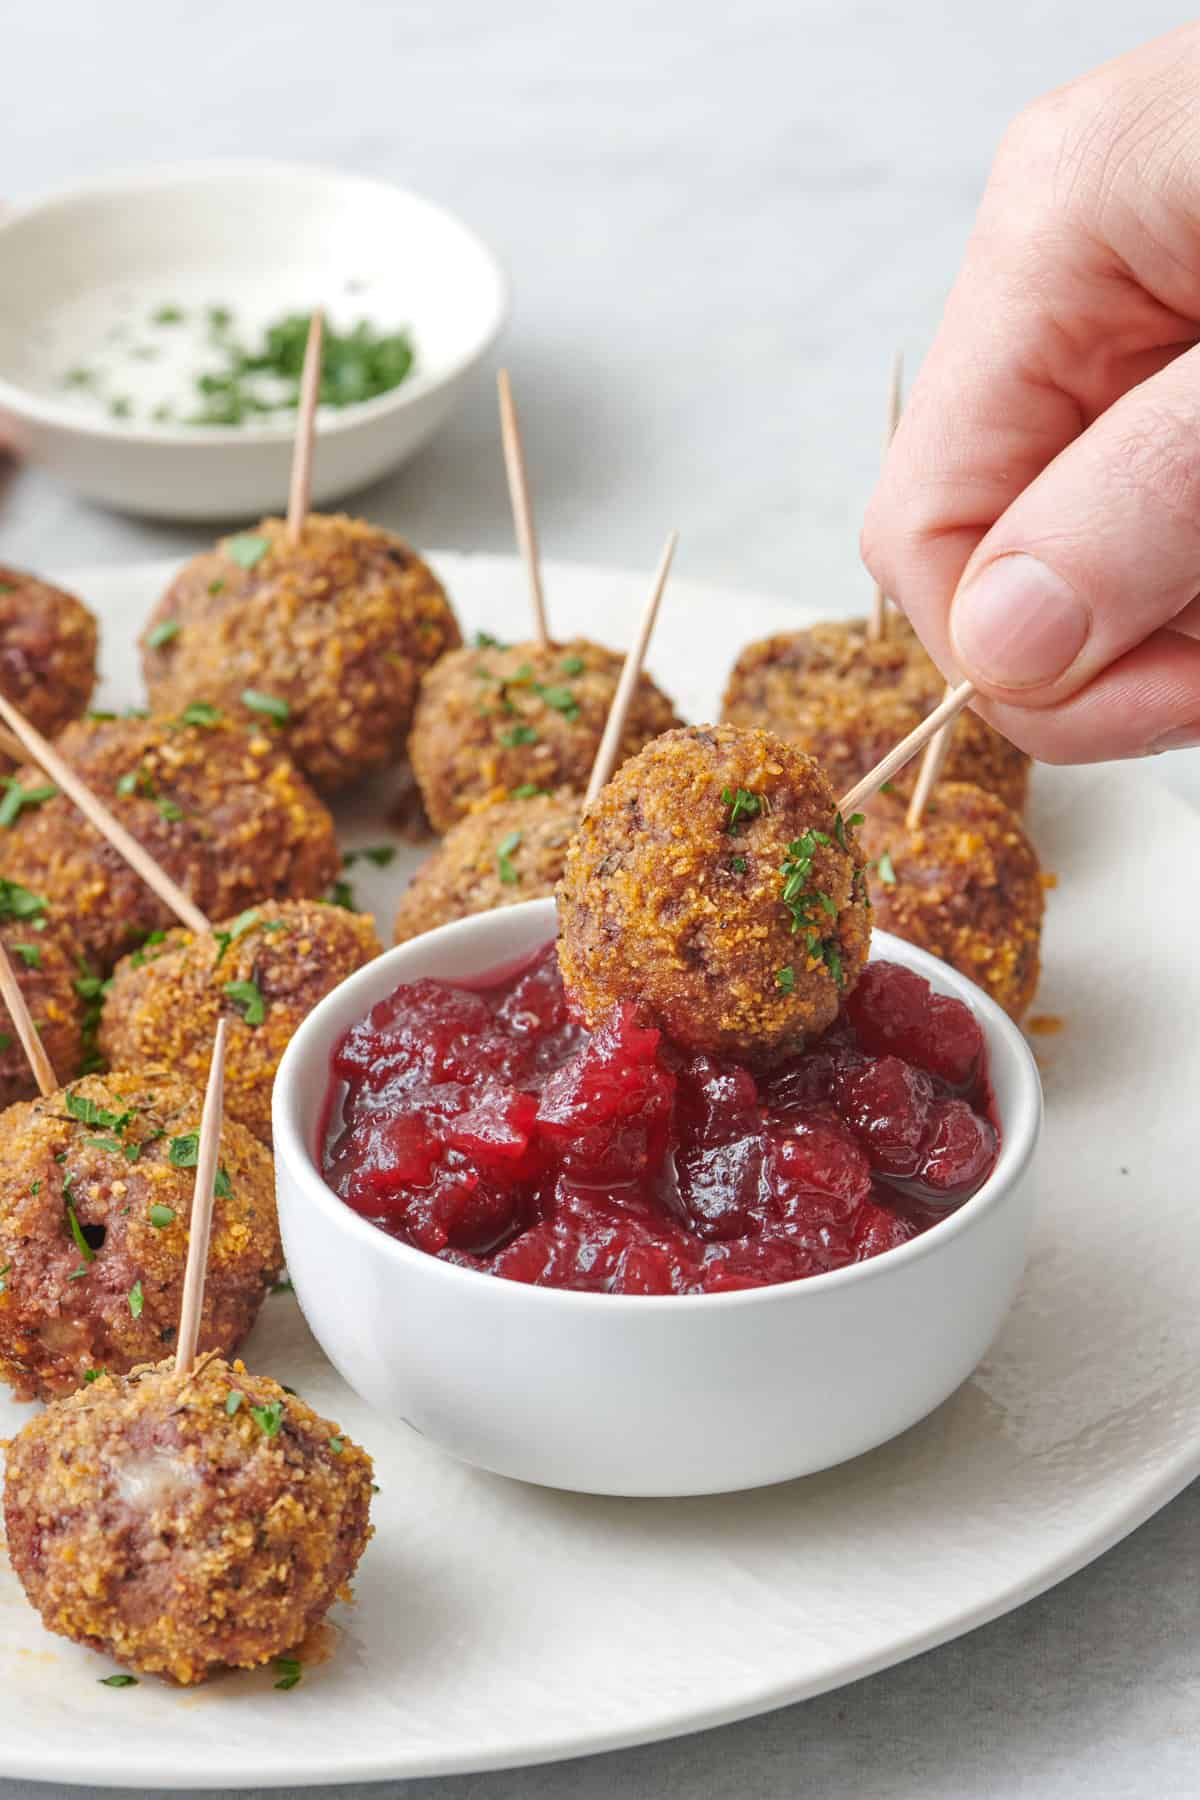 Hand dipping a crispy breadcrumb coated stuffed meatball in a small dish of cranberry sauce on a plate with more meatballs.